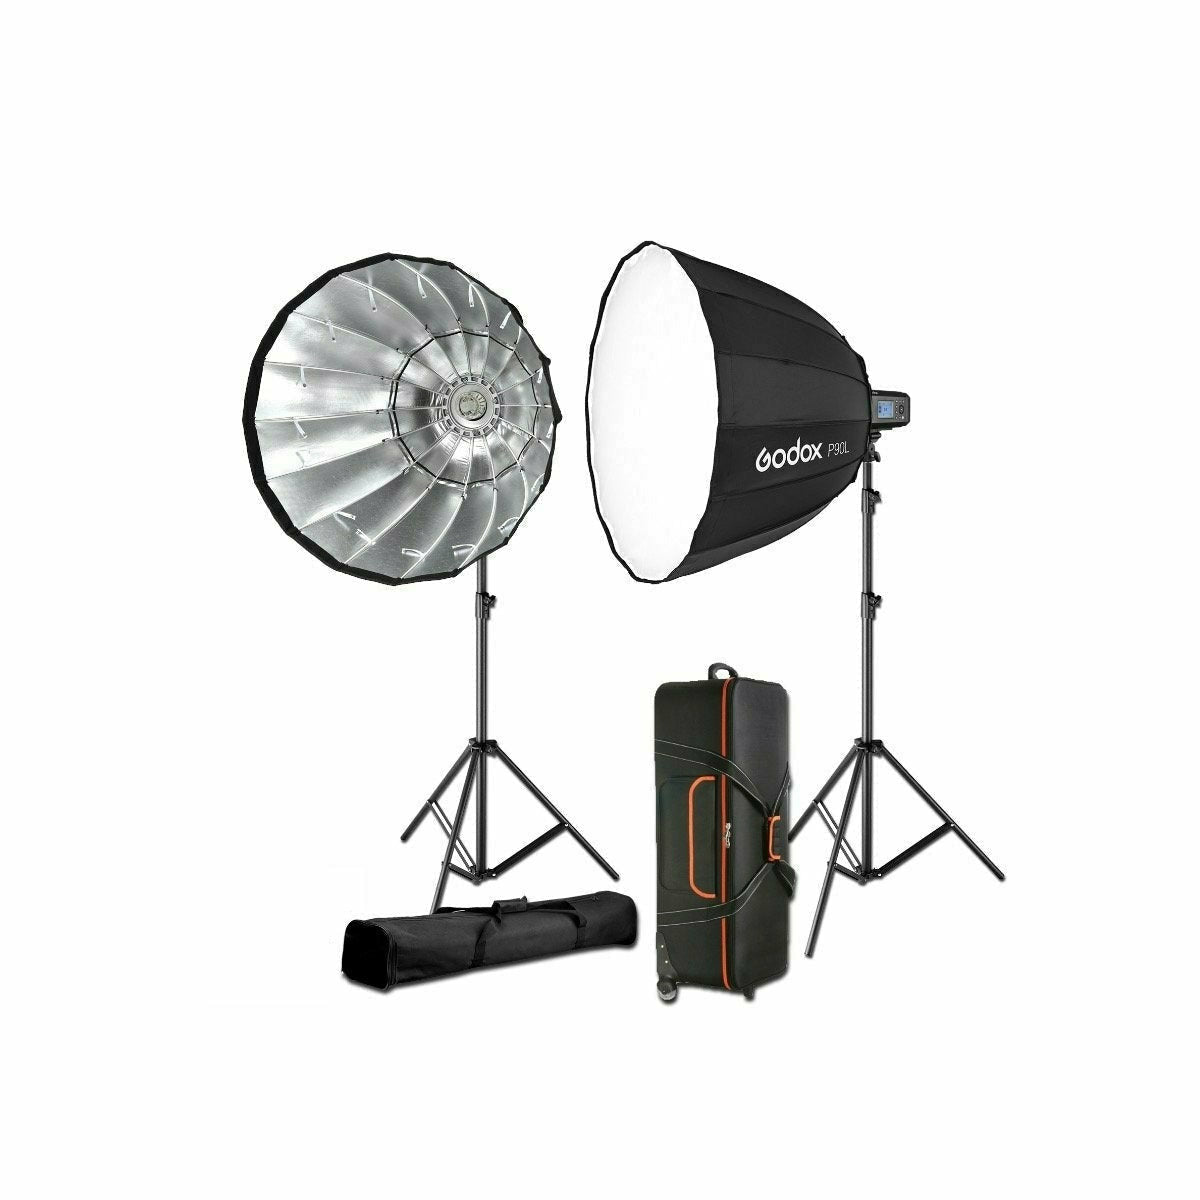 Godox AD600 Pro KIT -2x 600ws flash kit with 2 batteries, 2 softboxes, 1 tirgger and 2 stands - Dragon Image